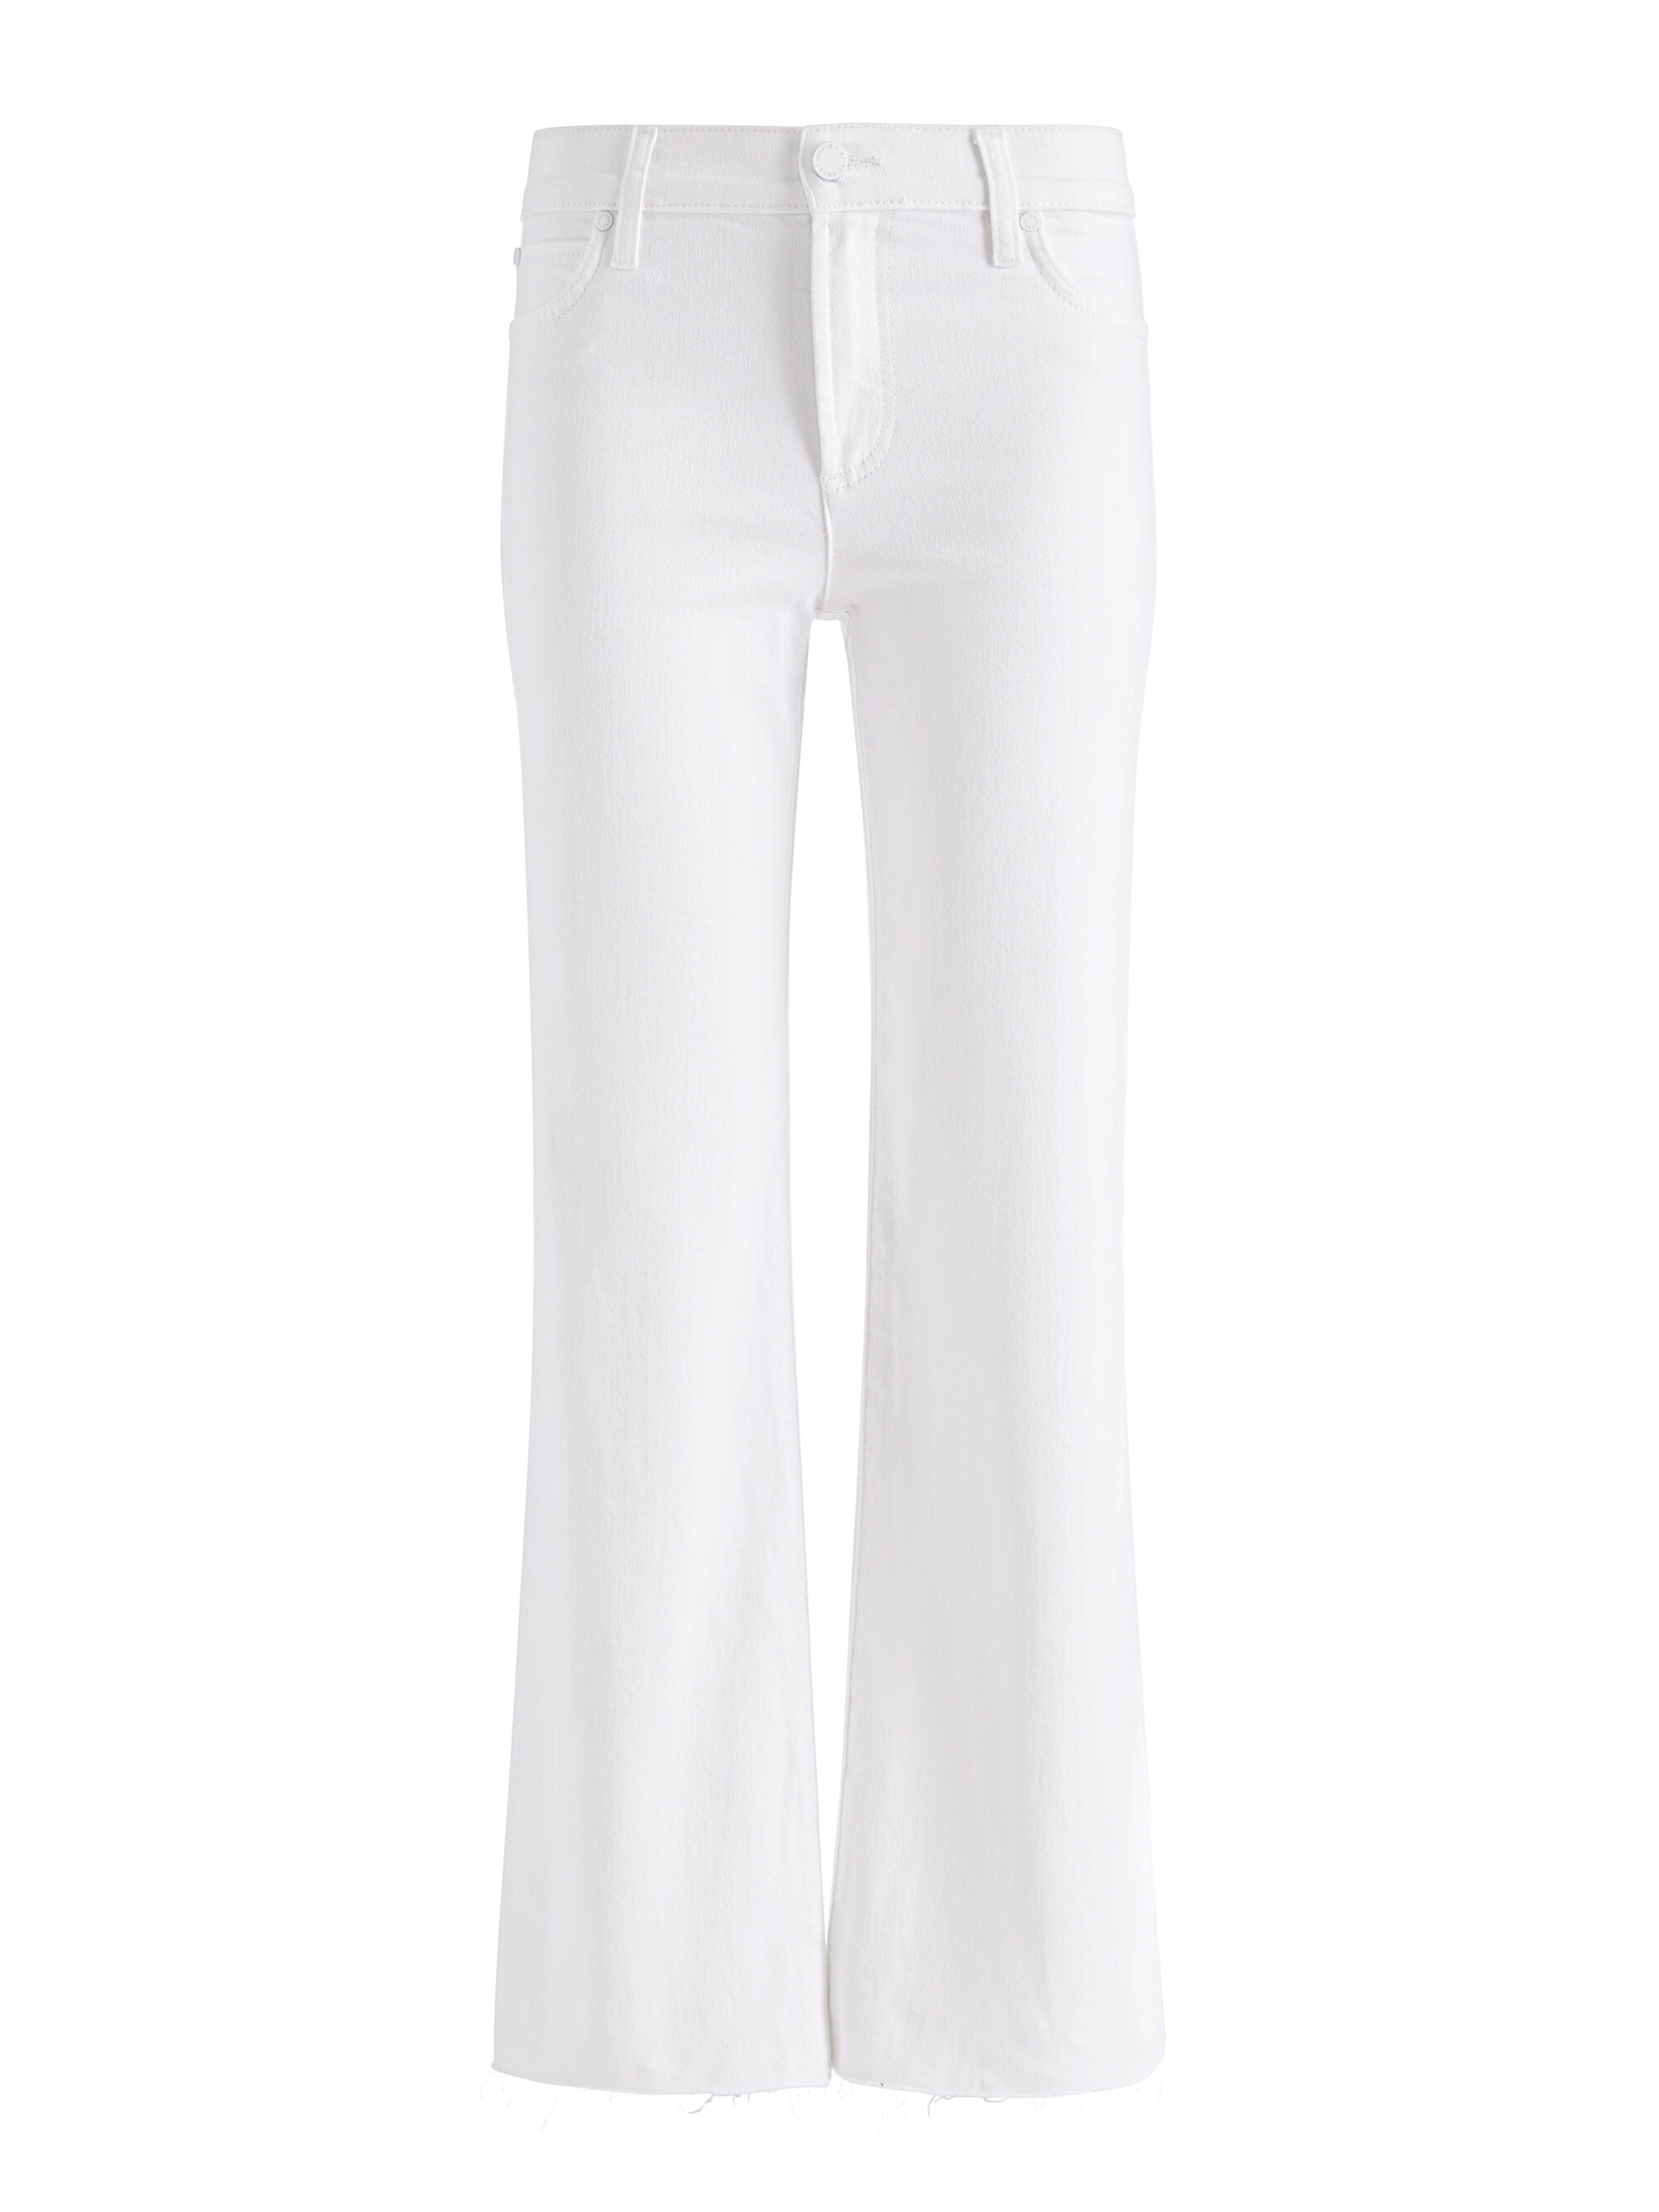 ROXIE LOW RISE FLARED LEG JEAN - WHITE - Alice And Olivia